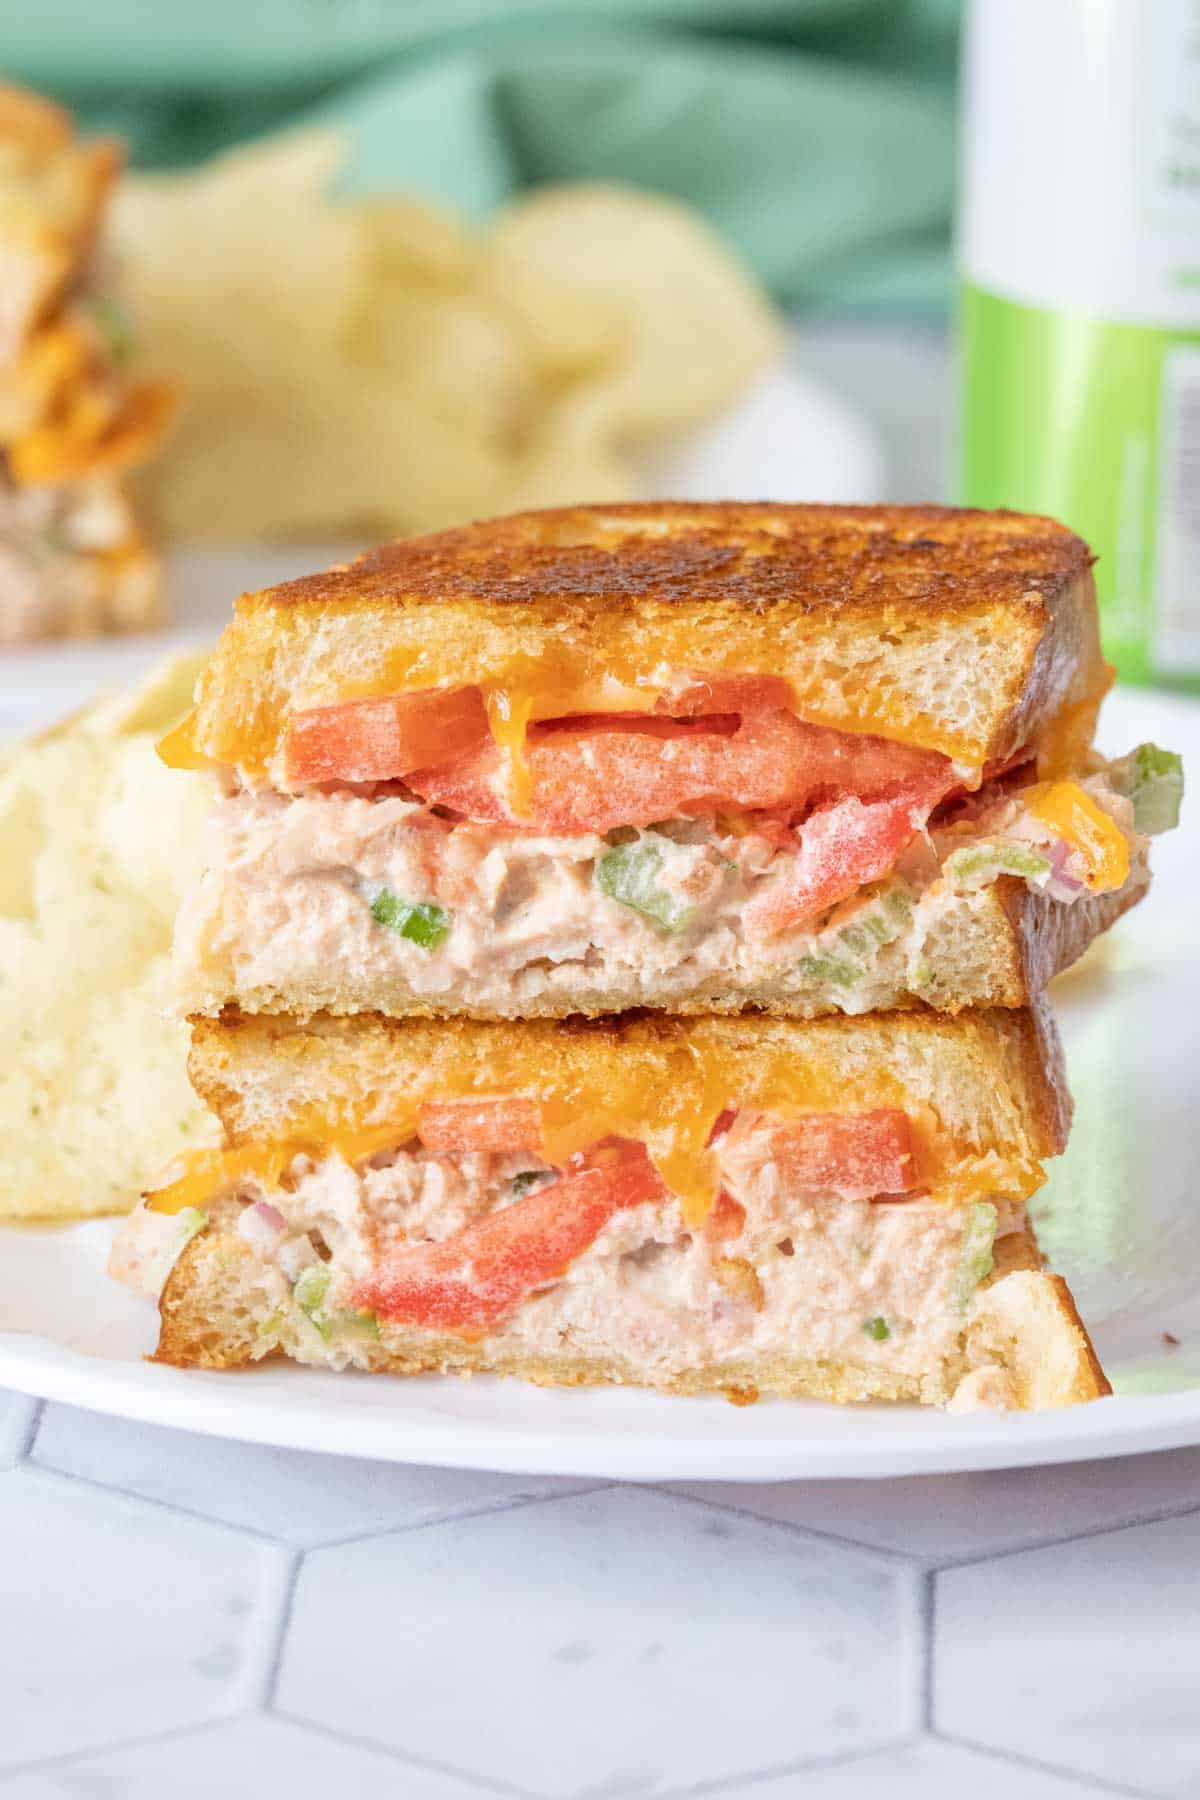 Two halves of a tuna melt stacked on a white plate, cut to show interior of sandwich.